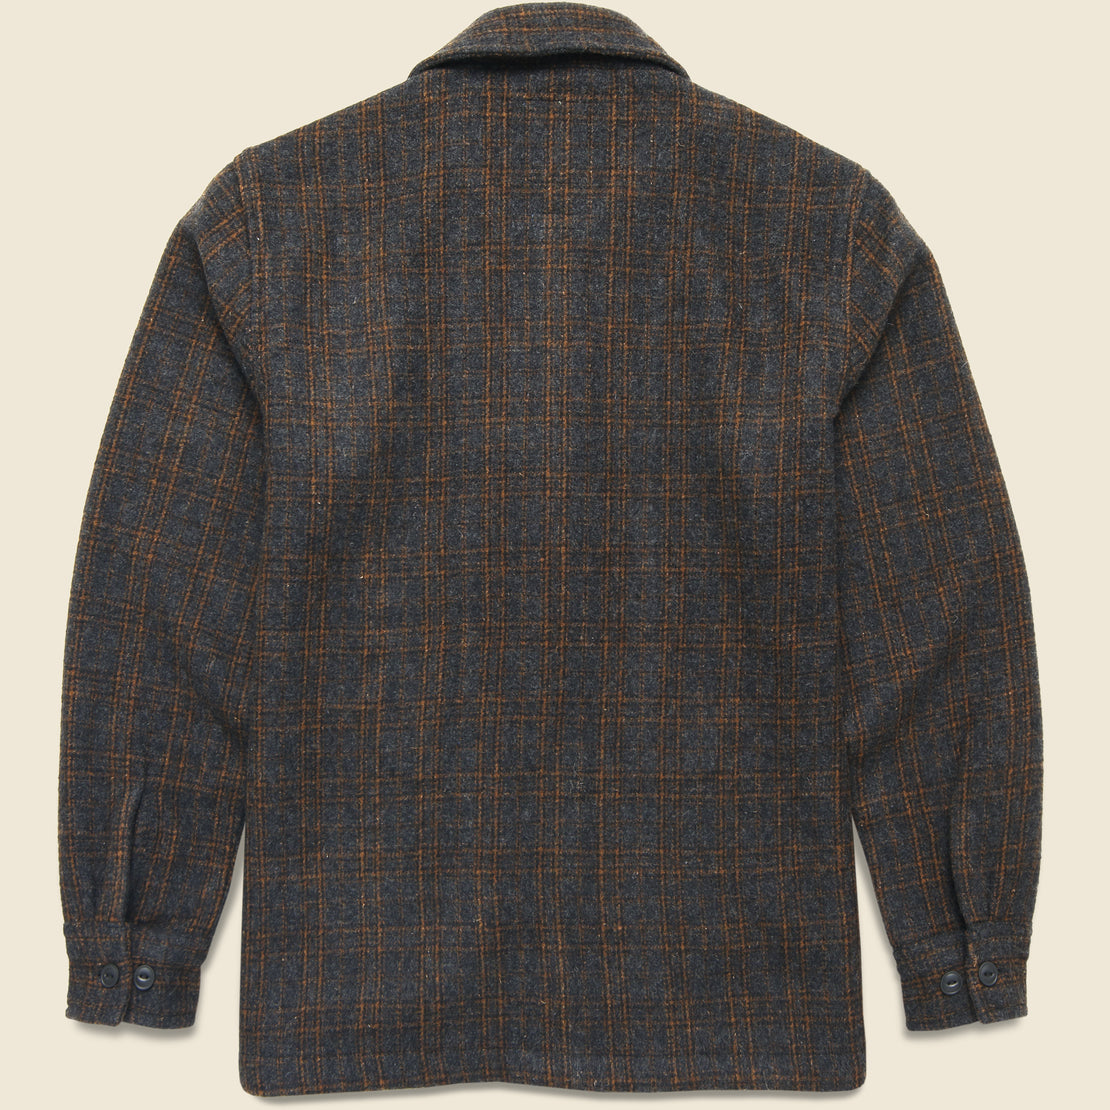 Watson Wool Car Coat - Heather Charcoal Brown Windowpane - Grayers - STAG Provisions - Outerwear - Coat / Jacket